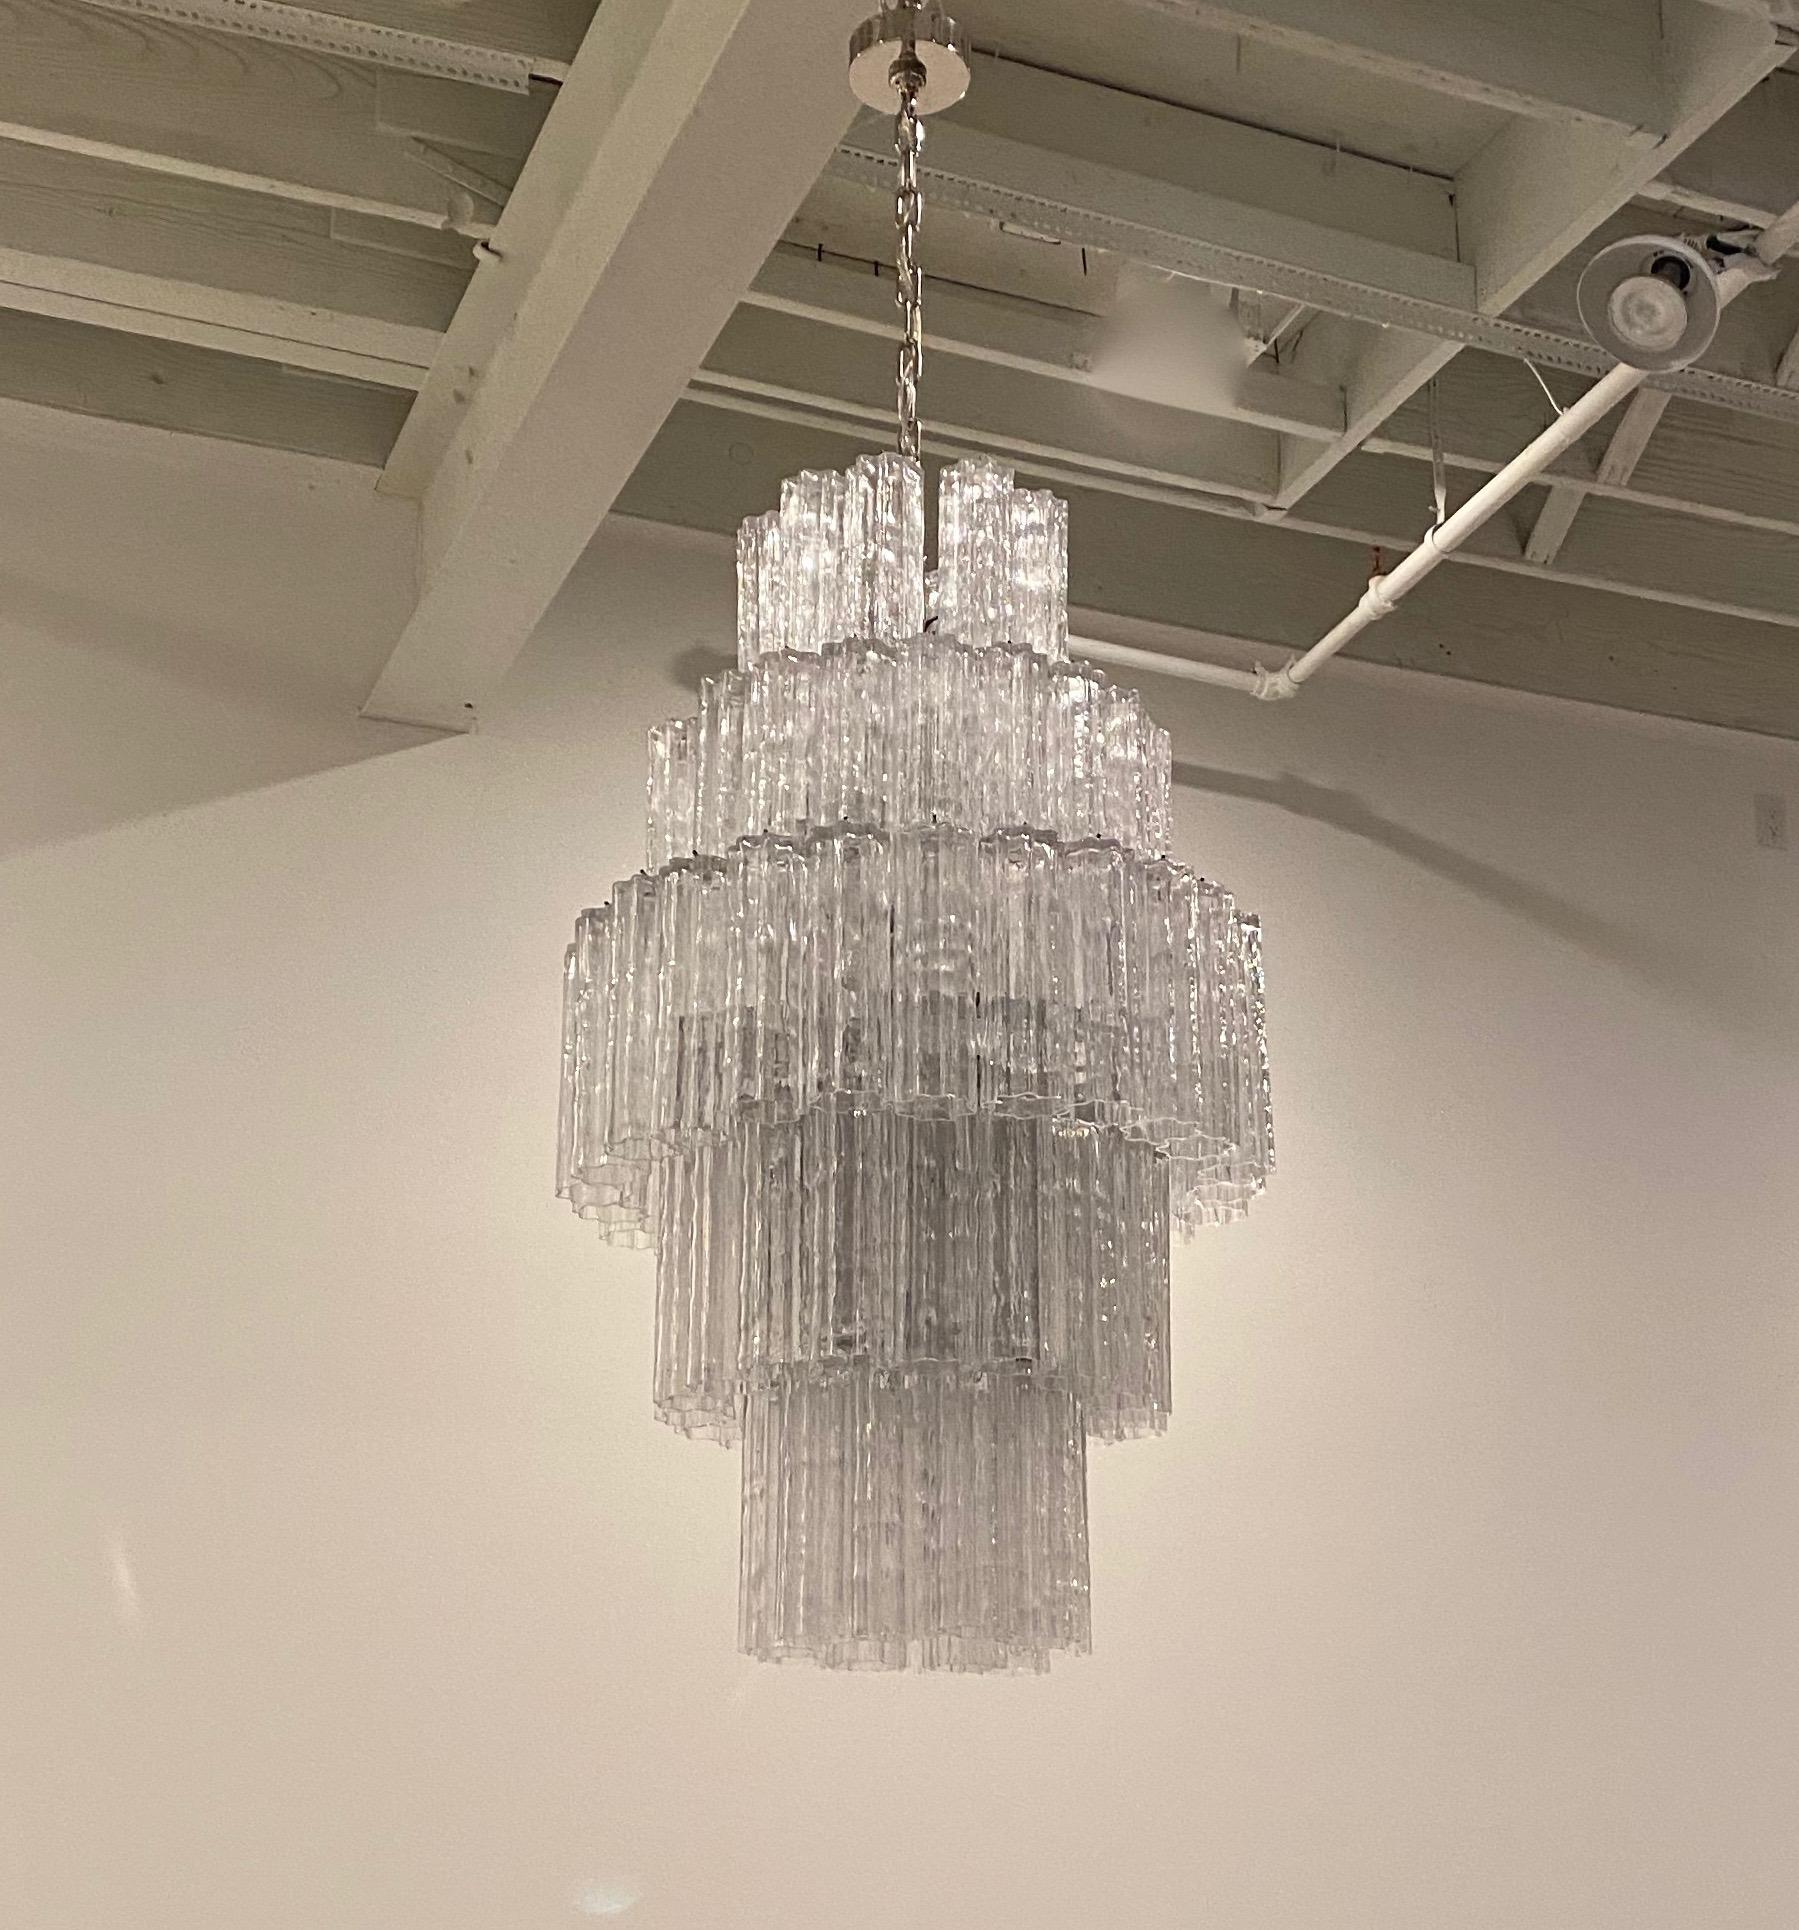 Mid-Century Modern tiered round chandelier. Consisting of tronchi cylindrical glass pieces. Each piece is hand blown and has a star or floral shape. The glass tronchi hangs from a nickel (silver) frame as pictured. Any amount of chain can be added